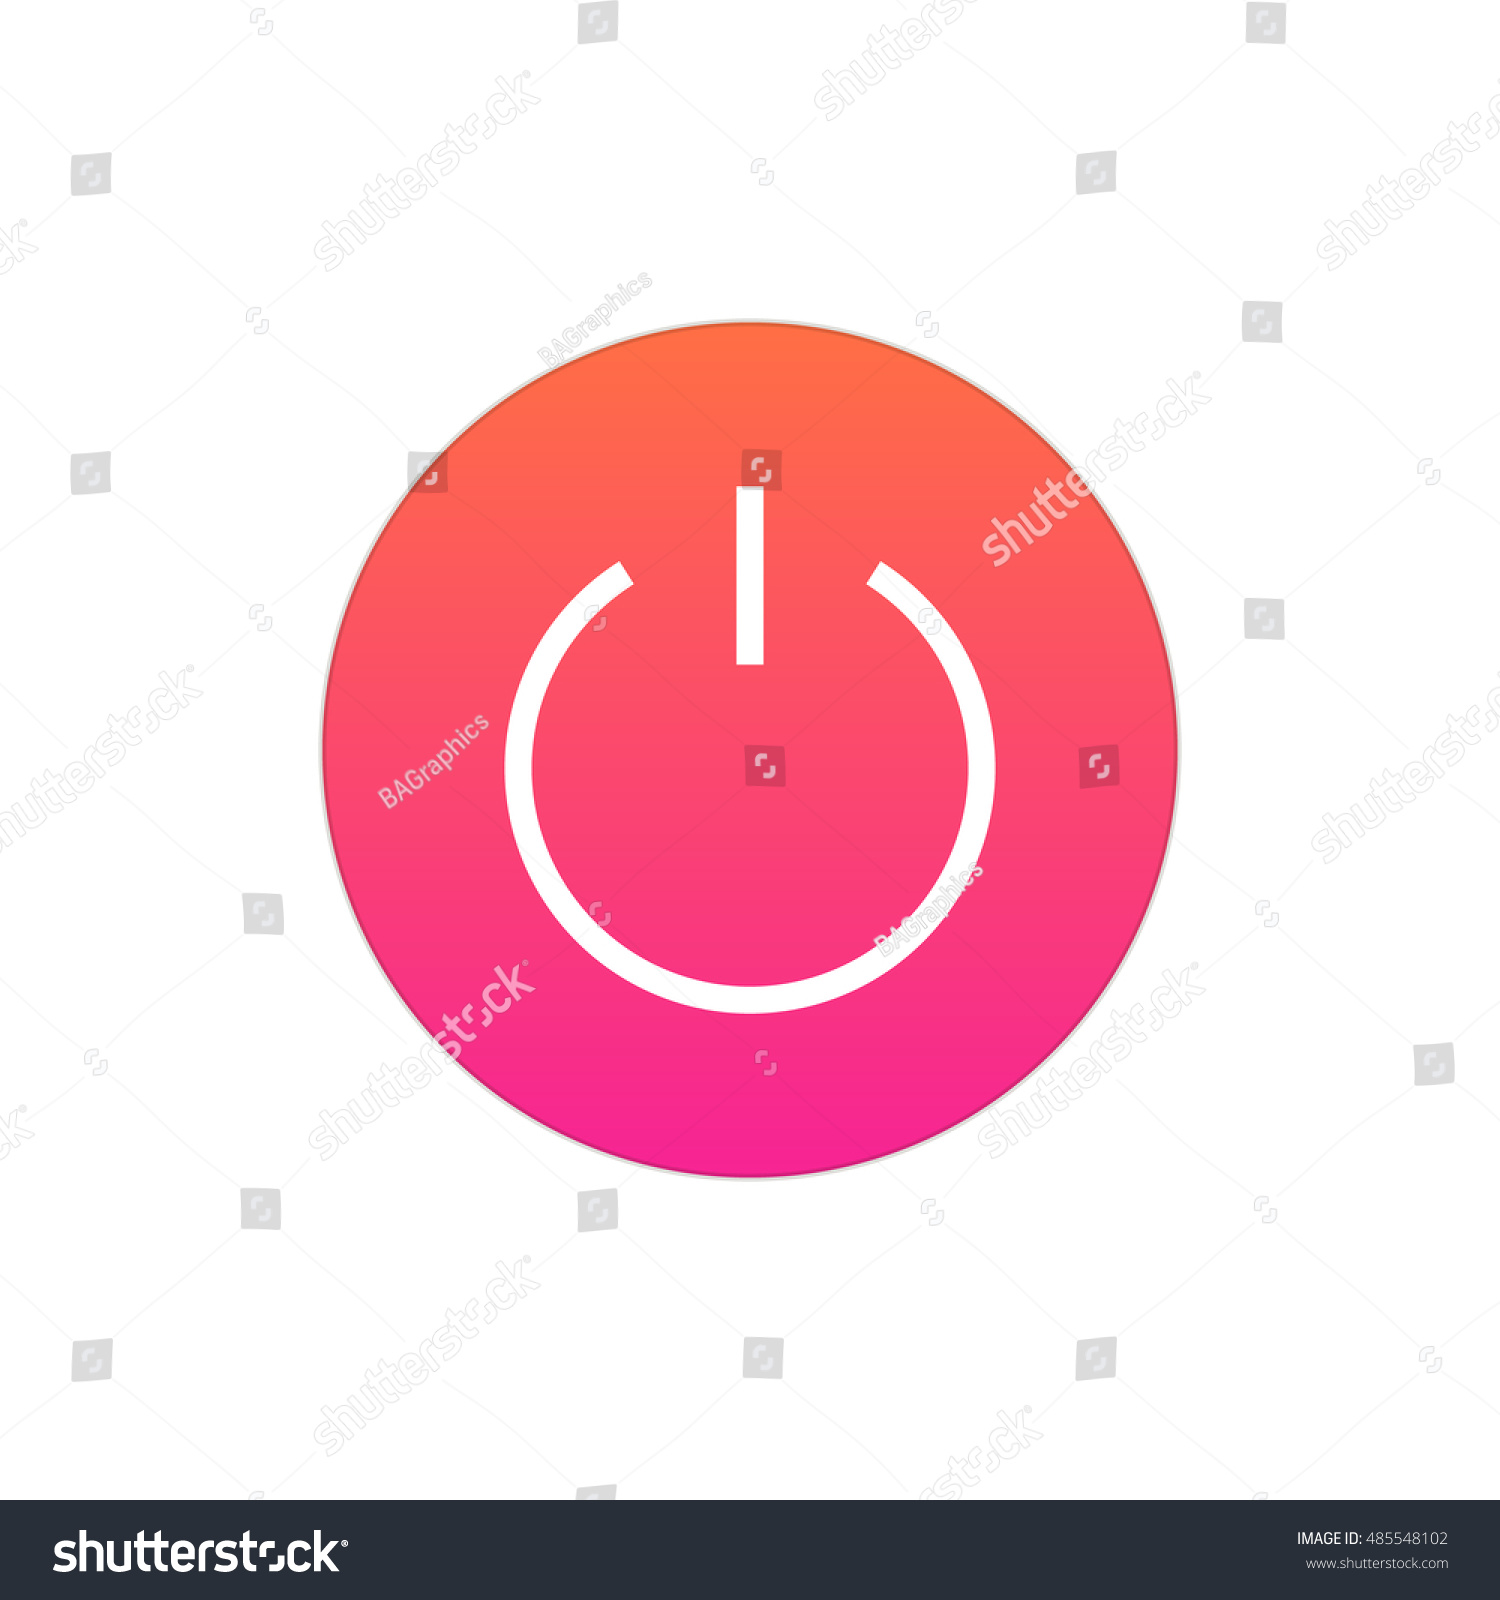 SVG of Power icon vector, clip art. Also useful as logo, circle app icon, web UI element, symbol, graphic image, silhouette and illustration. Compatible with ai, cdr, jpg, png, pdf, svg and eps formats. svg